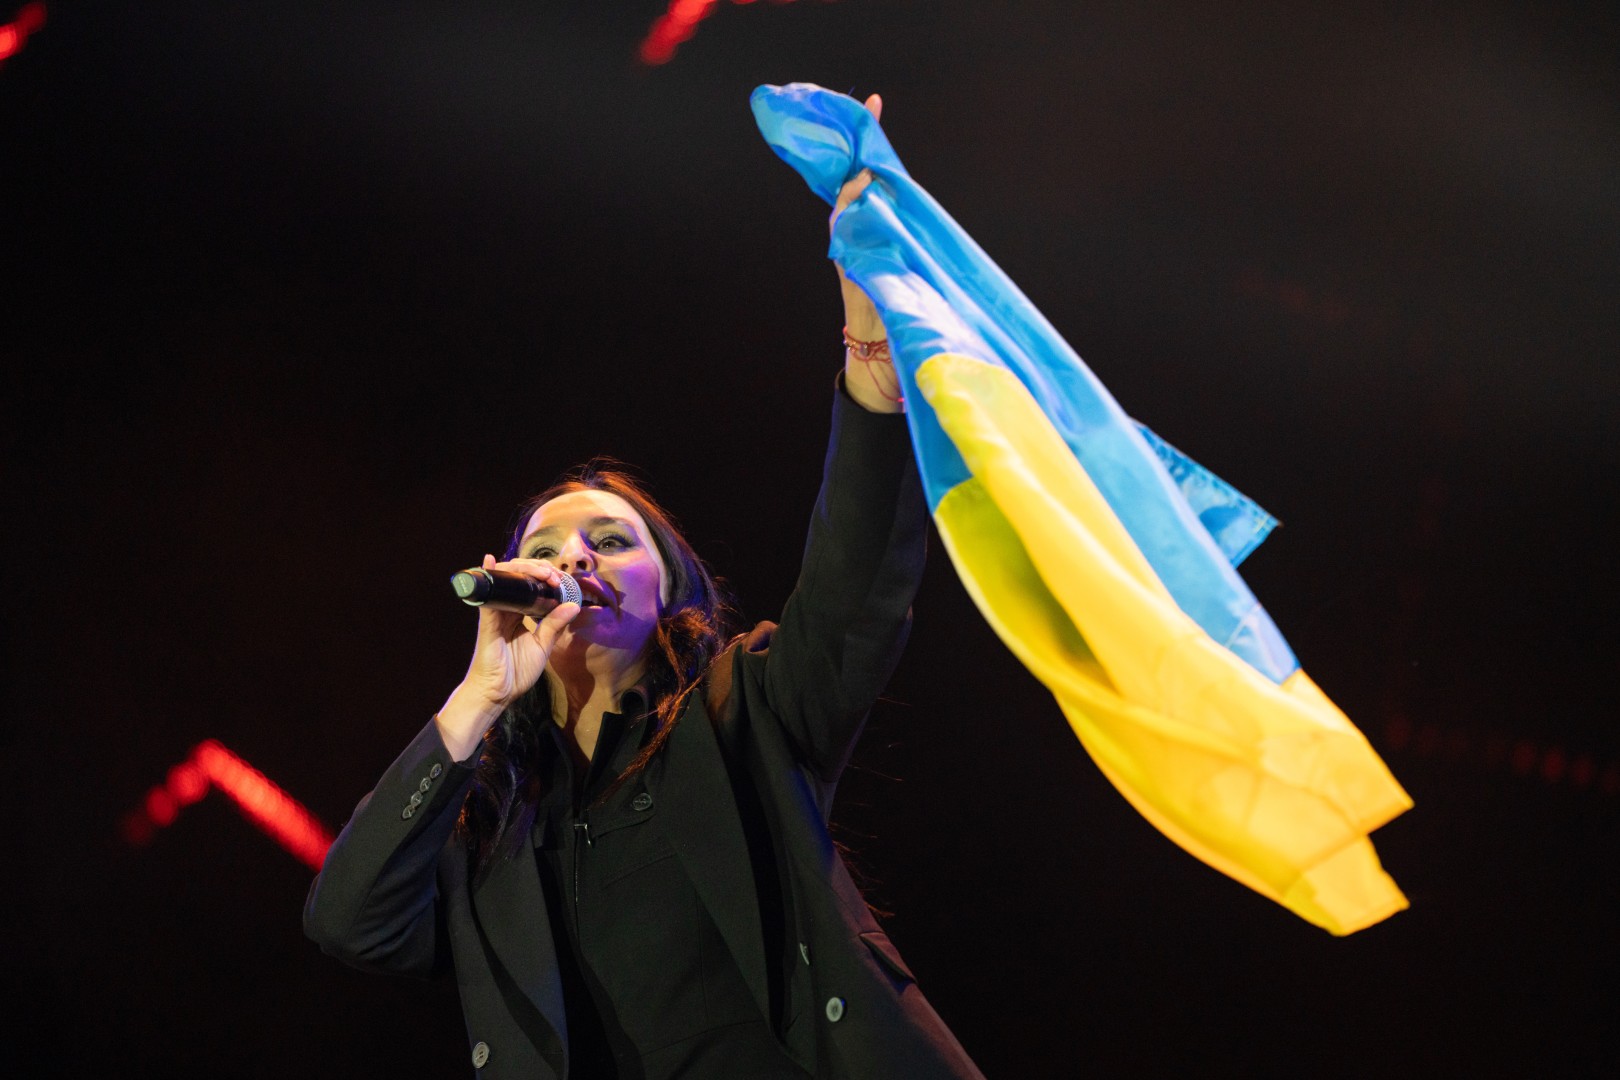 Jamala at National Arena in Bucharest on March 12, 2022 (4aef2793d3)